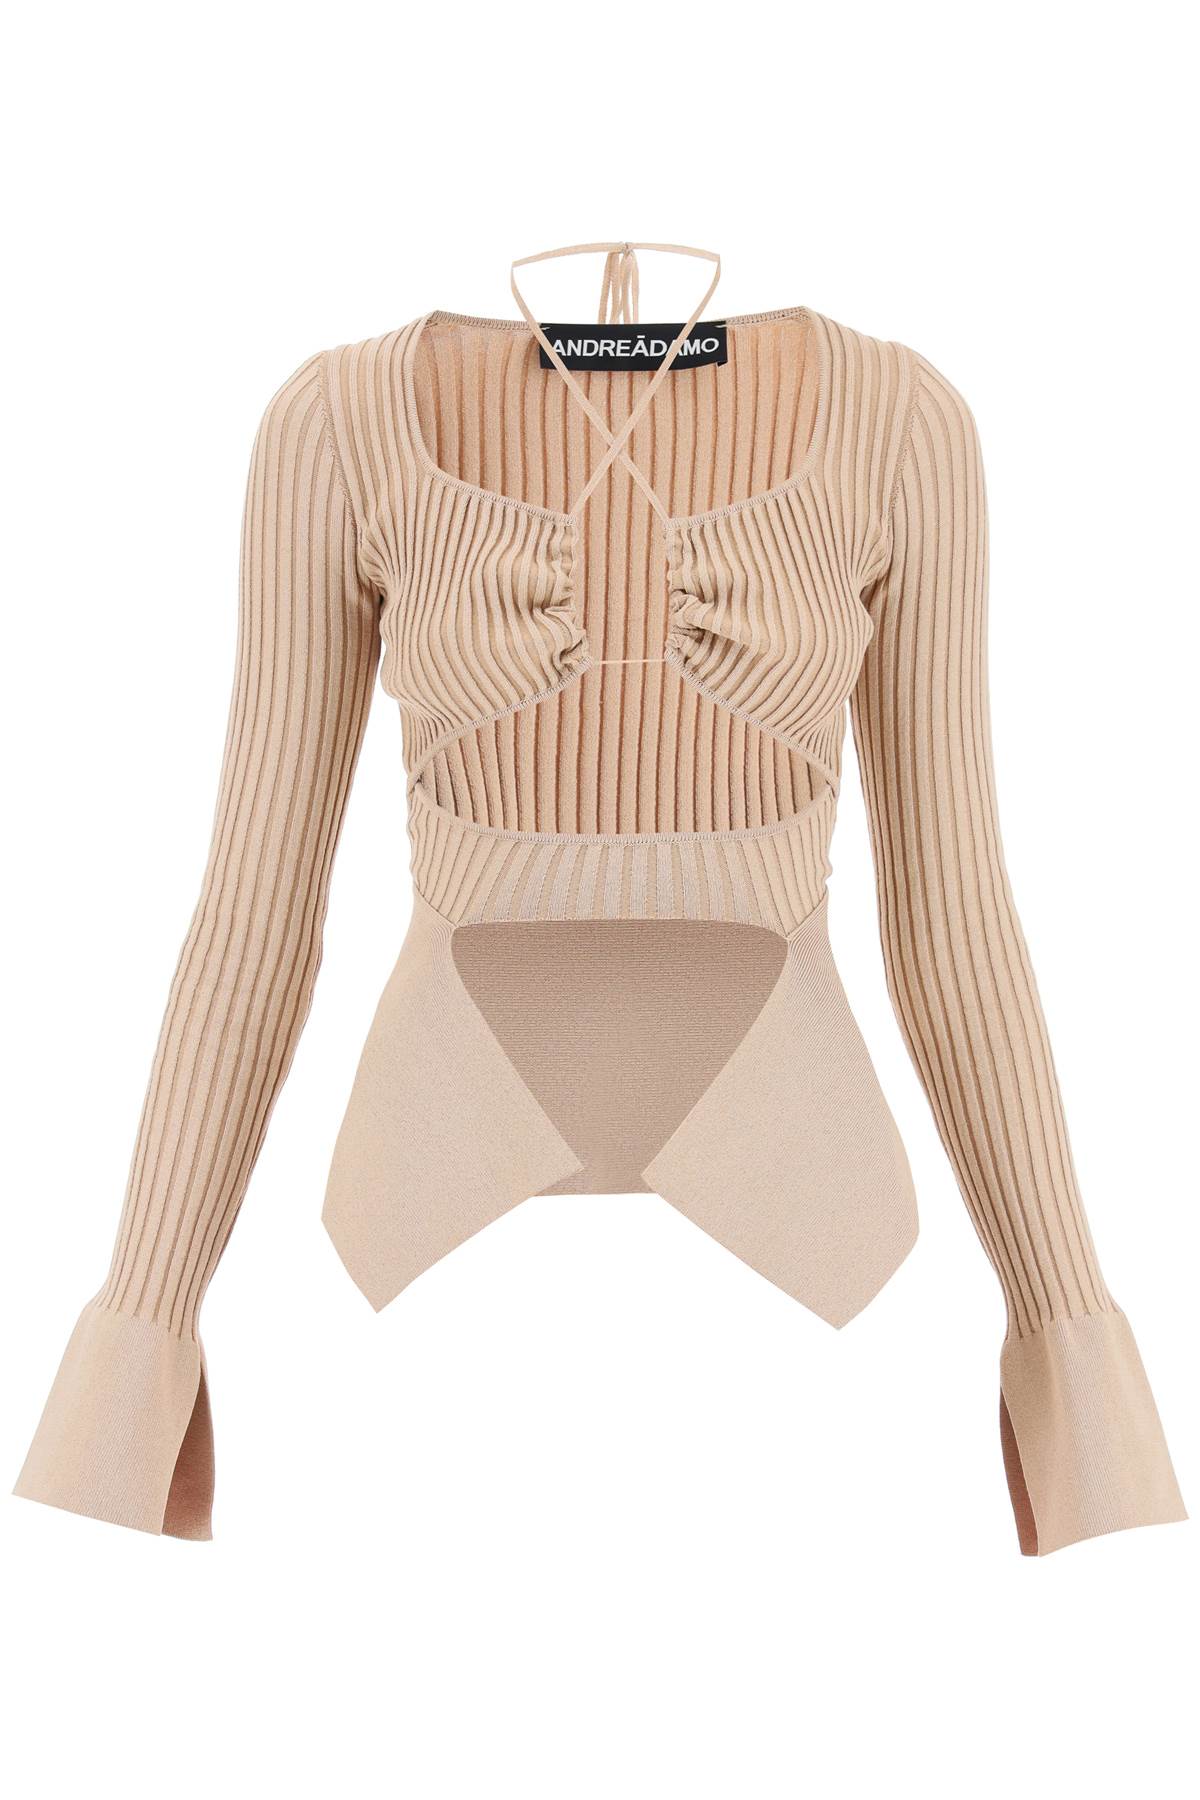 ANDREADAMO Ribbed Knit Top With Cut-out